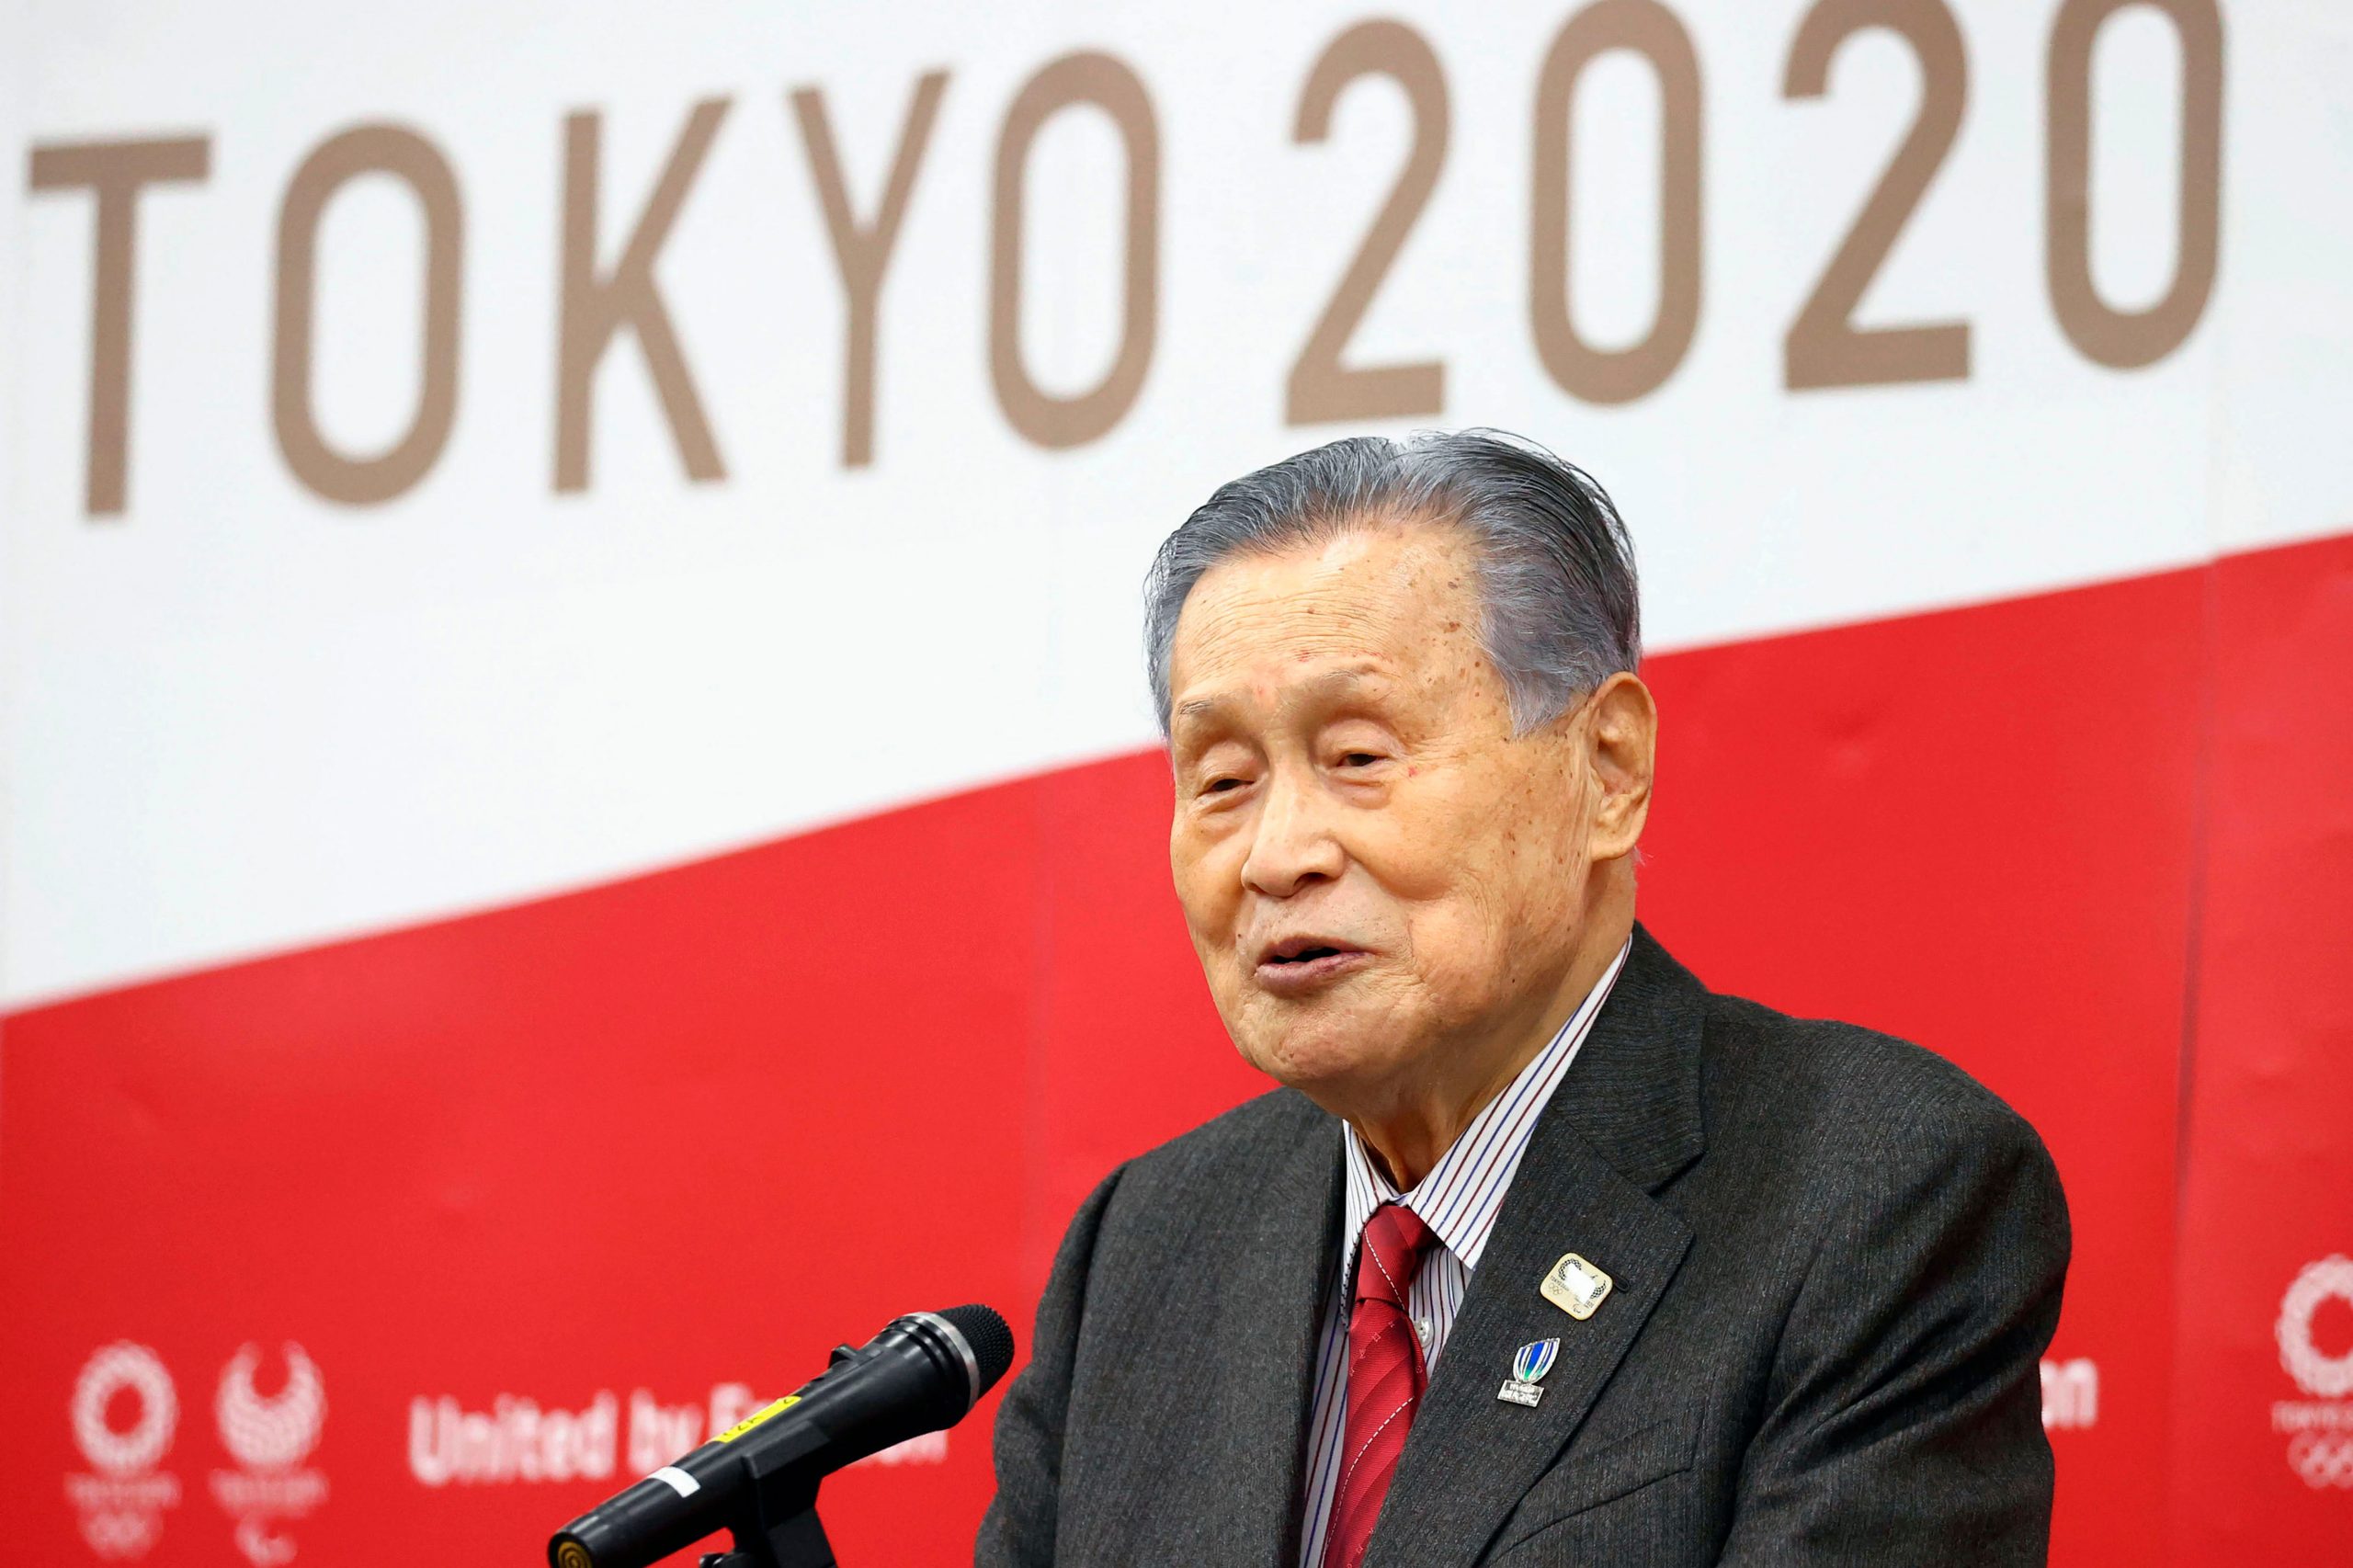 Tokyo Olympics 2020 chief makes ‘sexist’ remarks, says meetings with women ‘take time’